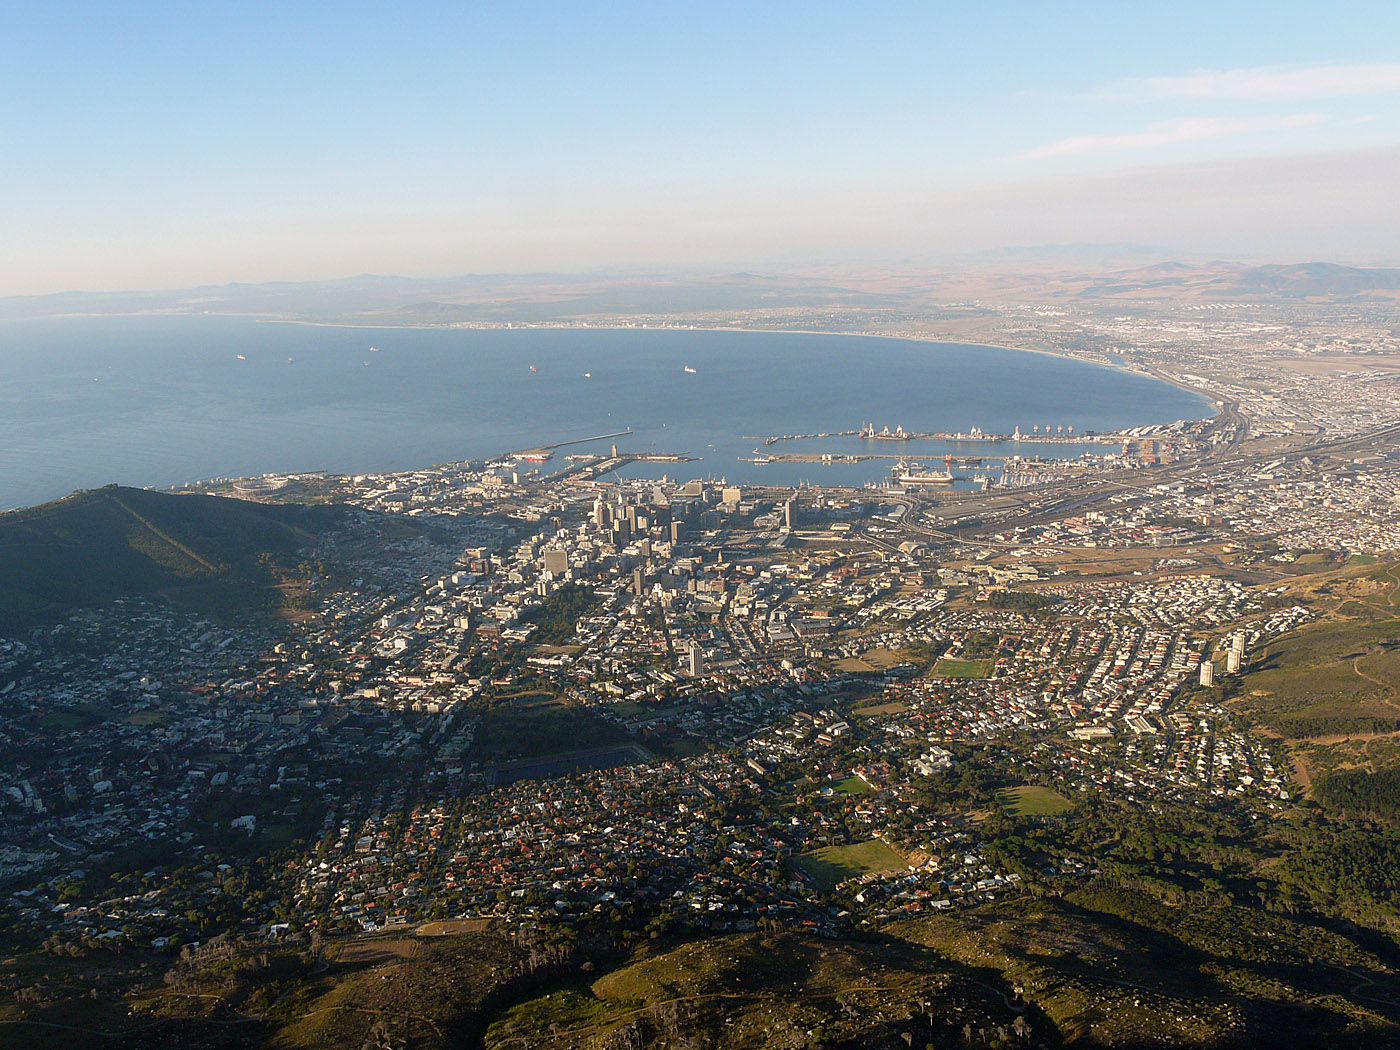 View from Table Mountain, Cape Town